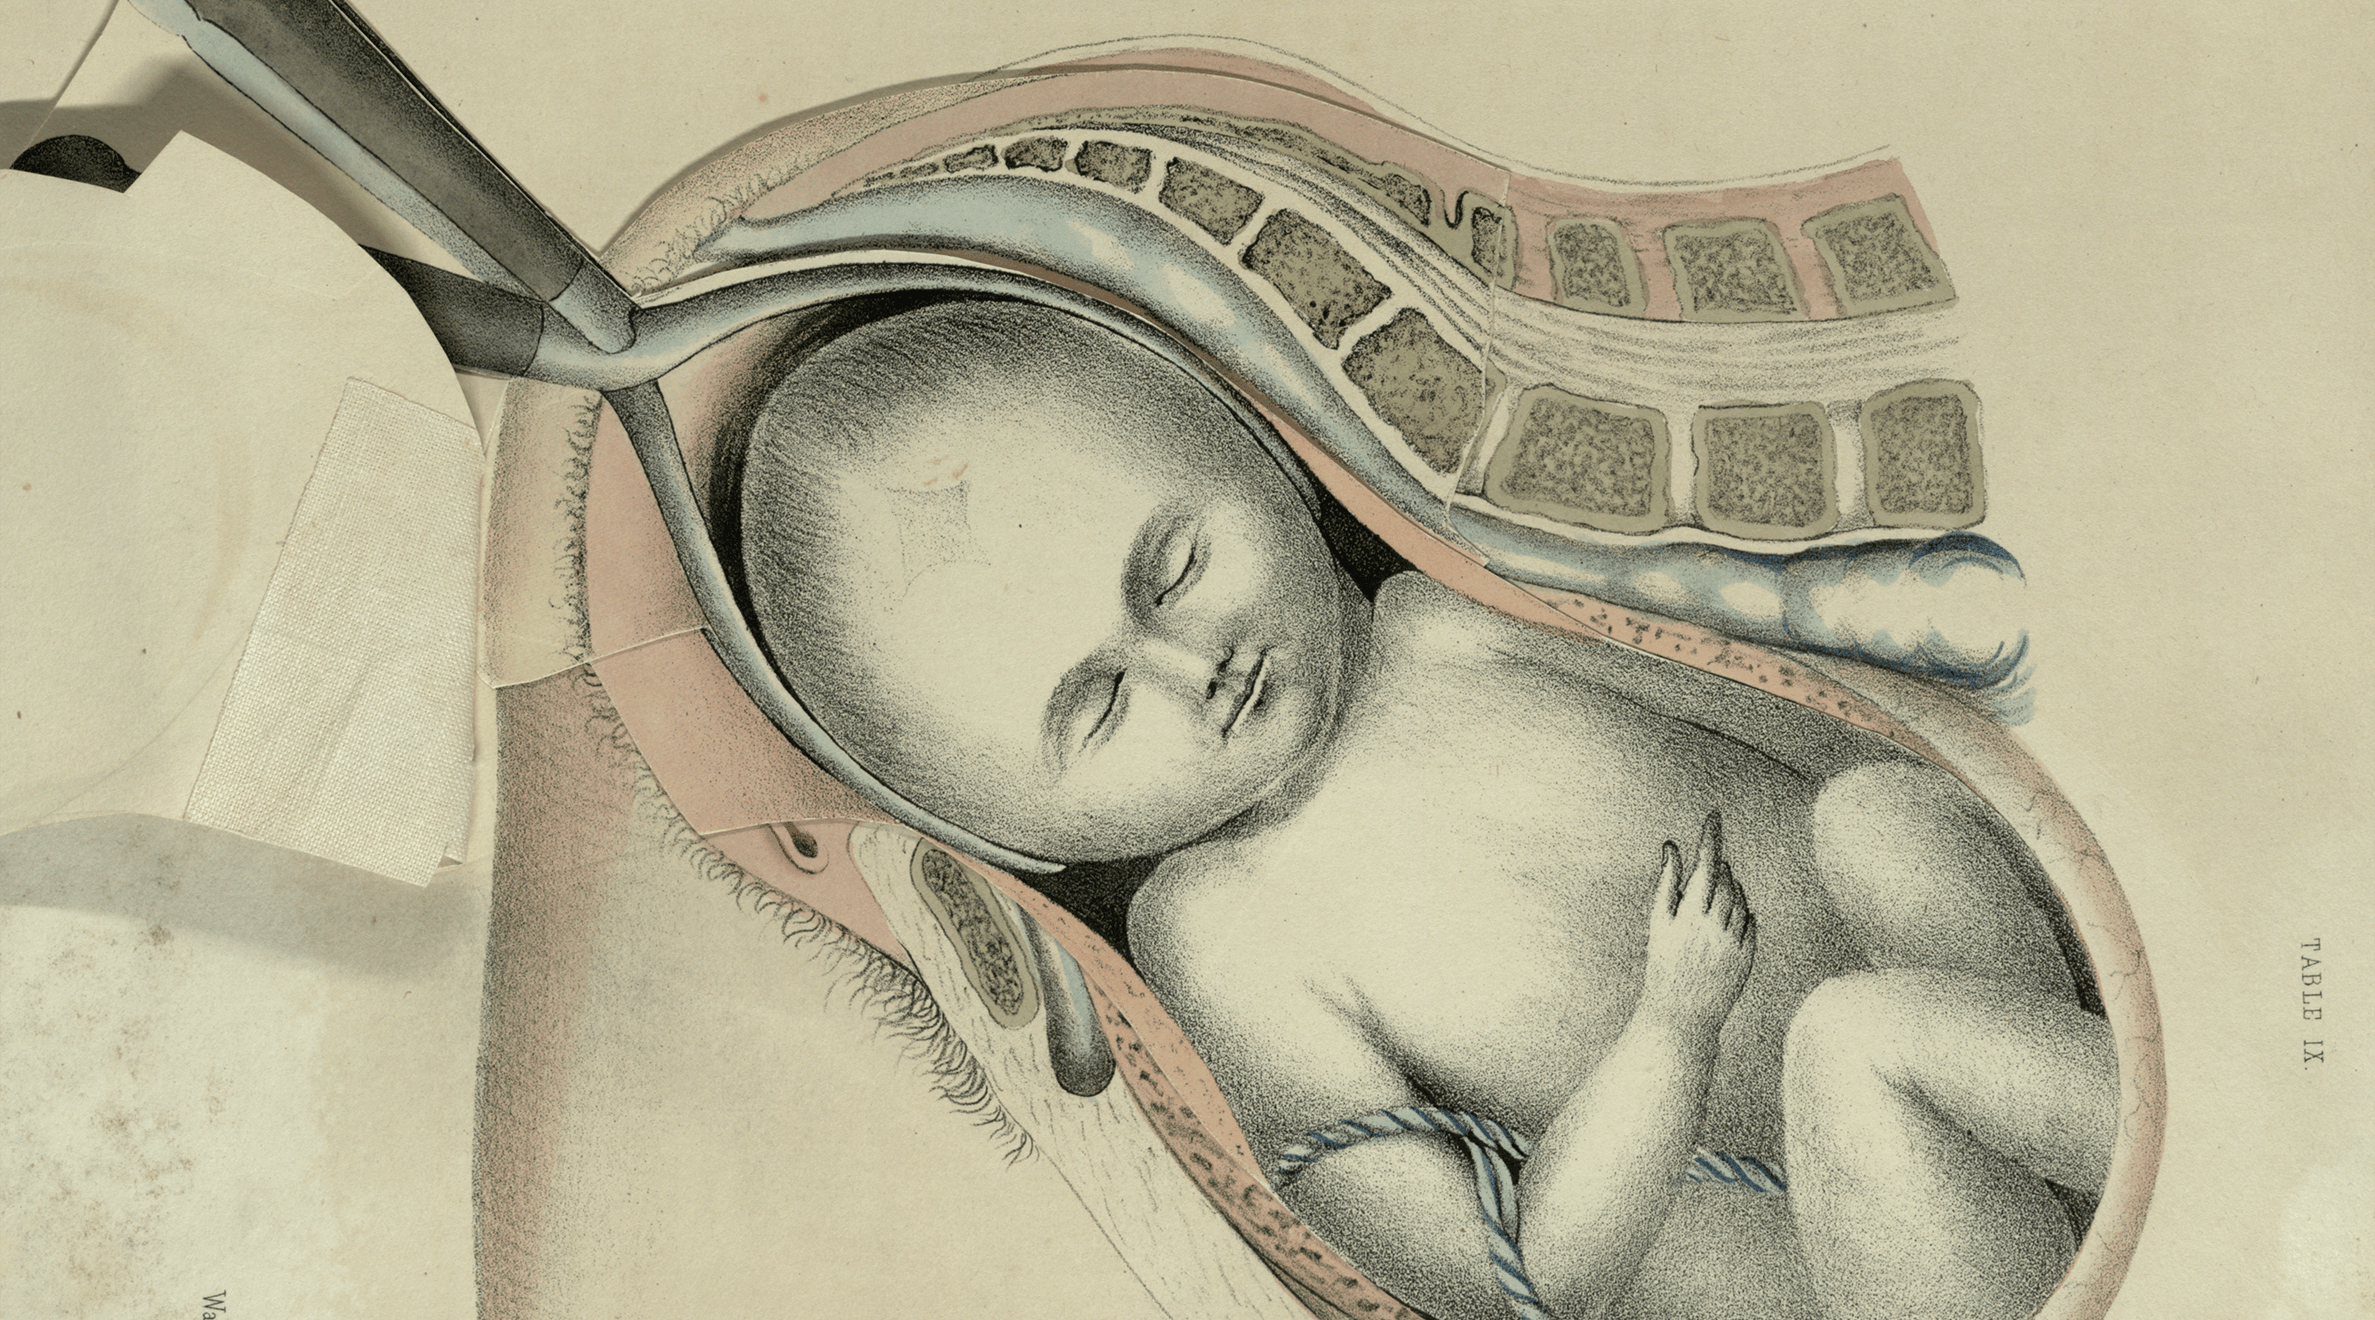 Anatomical illustration of a baby being pulled from its mother with forceps